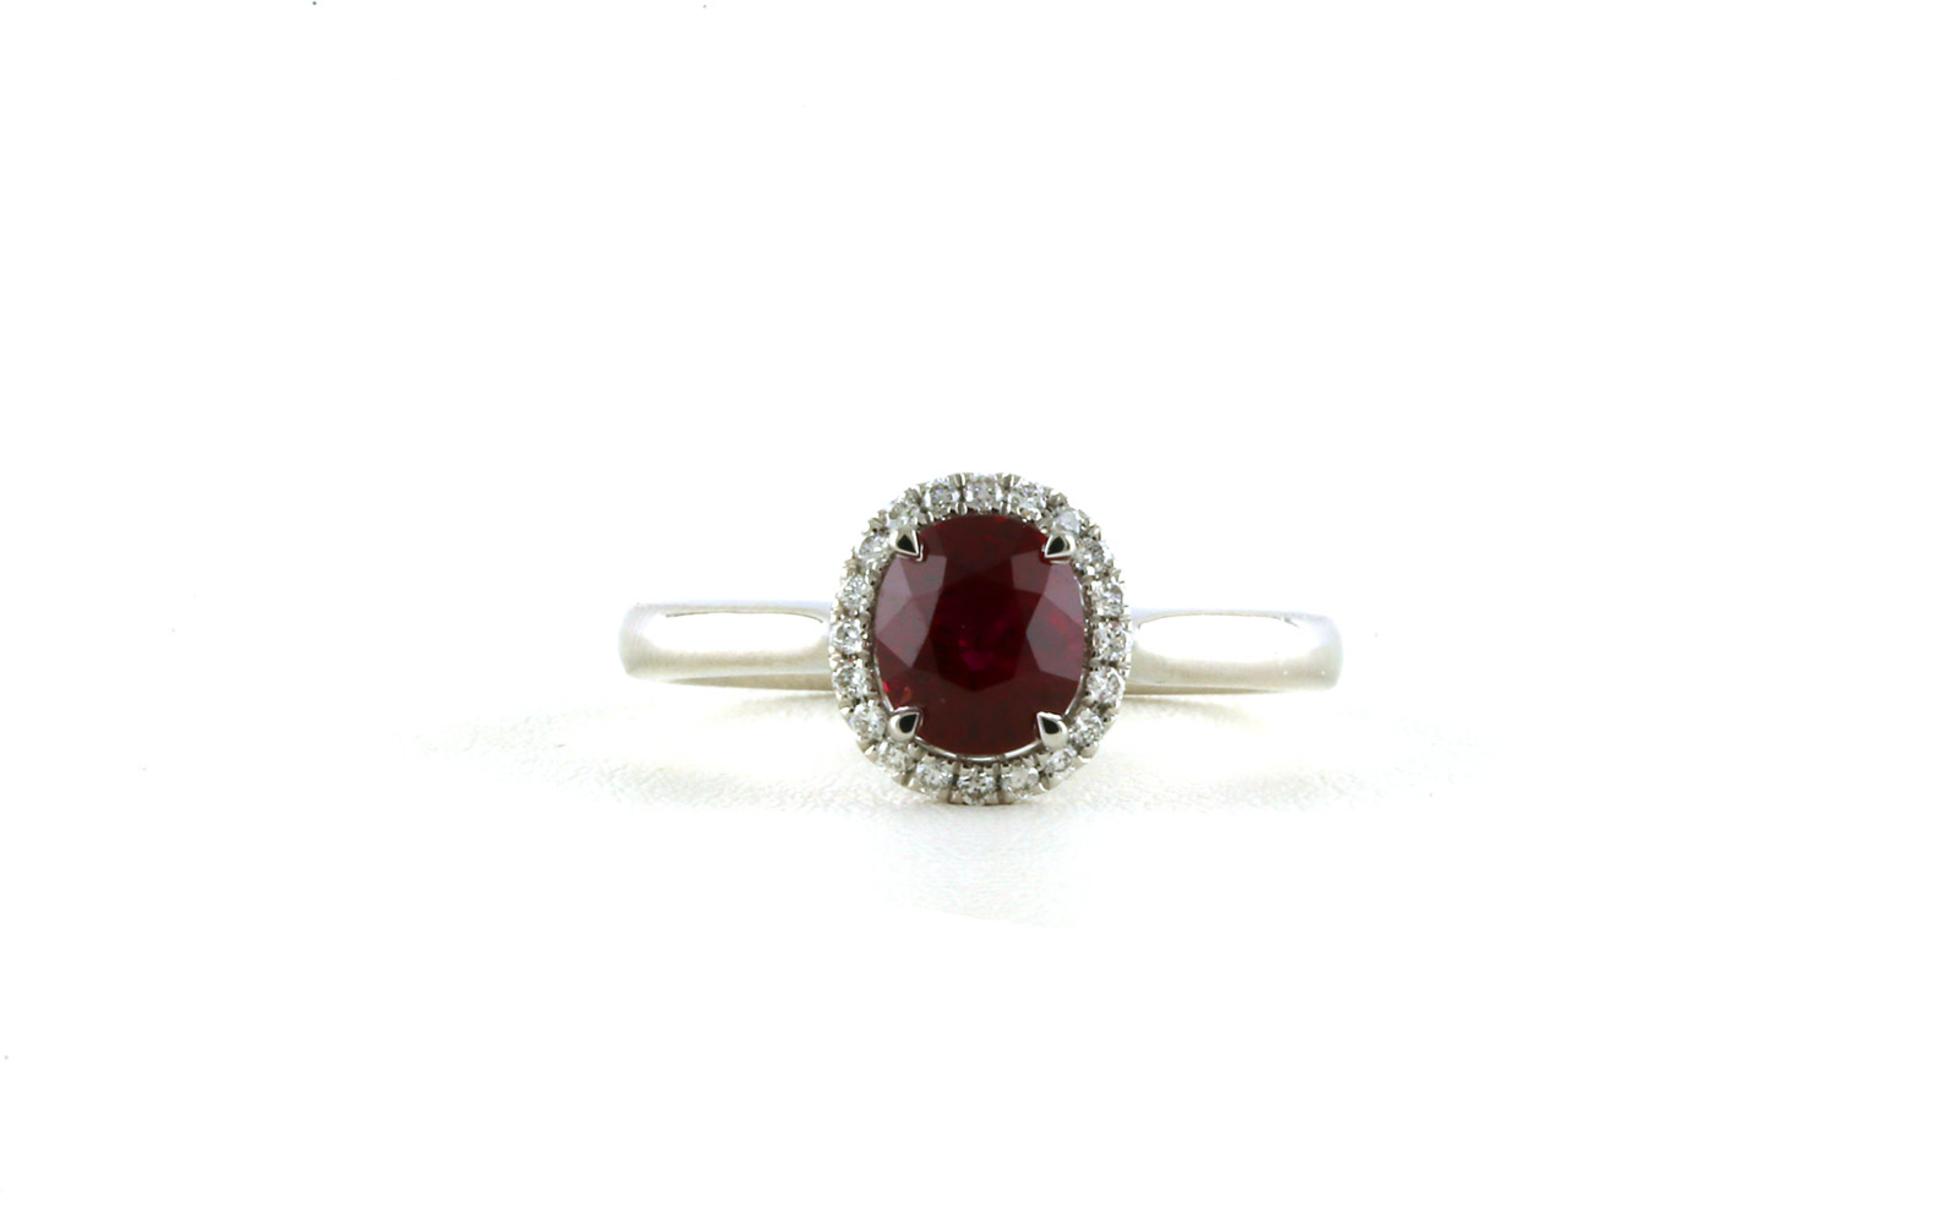 Halo-style Oval-cut Ruby Ring in White Gold (1.22cts)